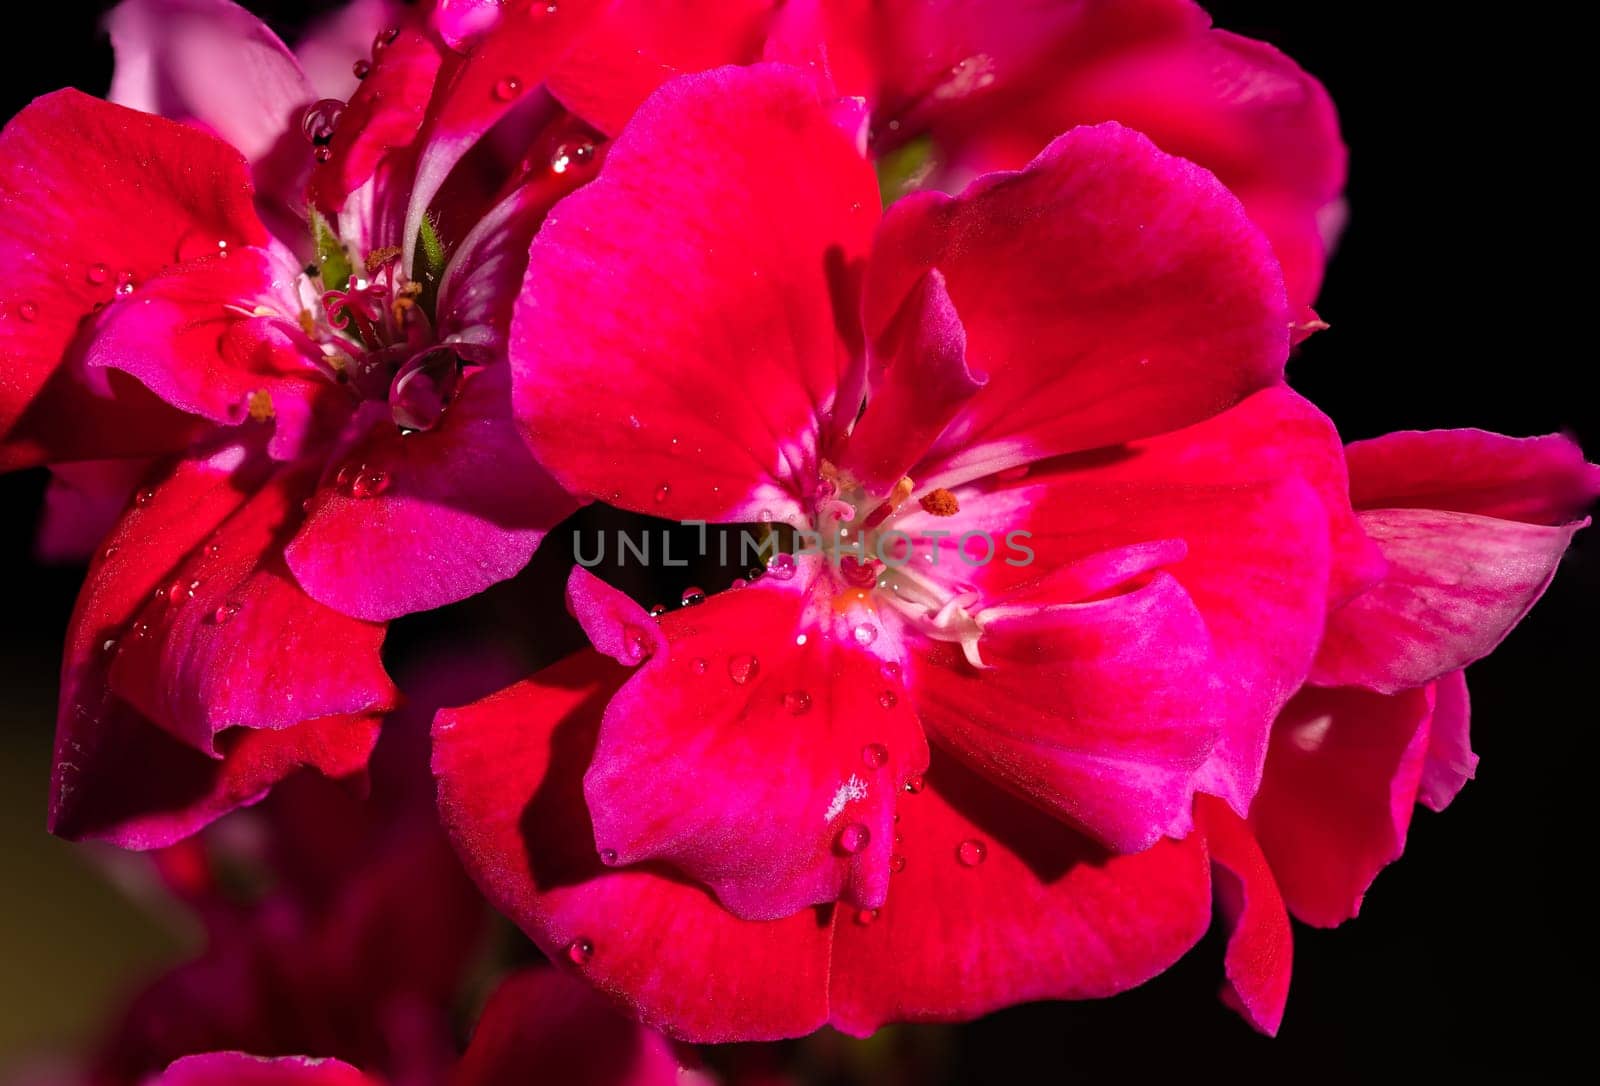 Beautiful blooming red kalanchoe flowers isolated on a black background. Flower heads close-up.